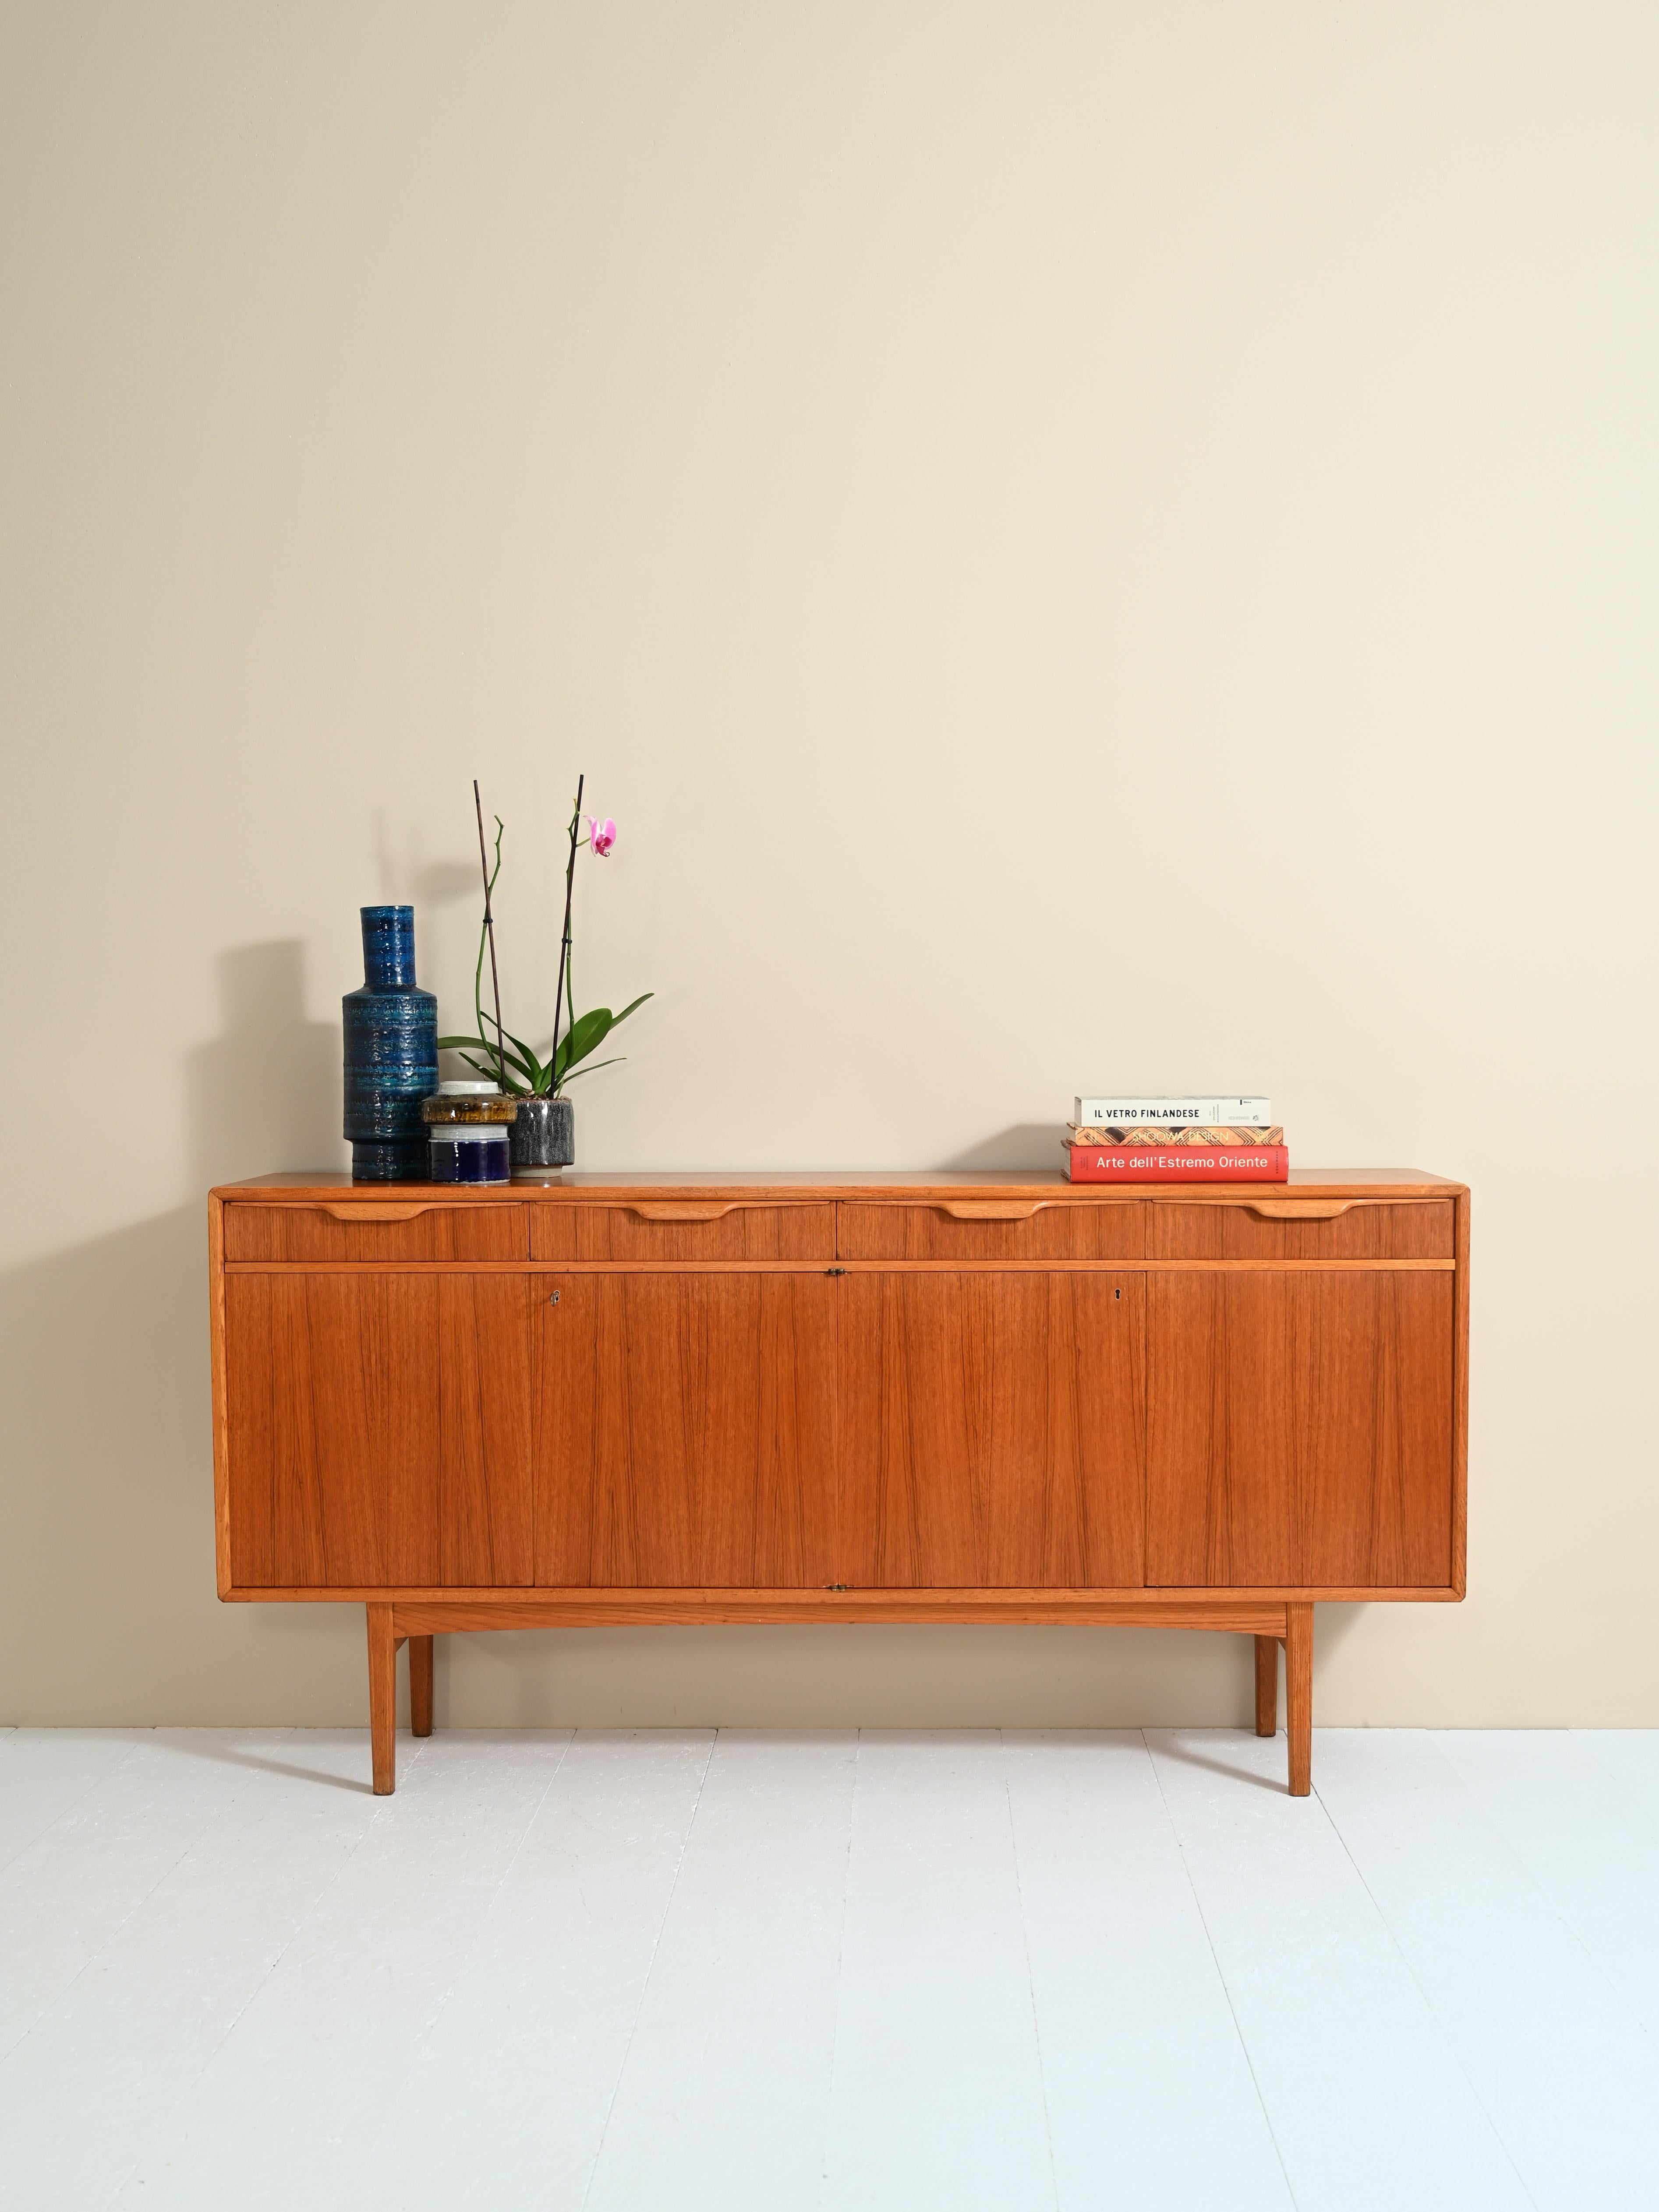 Original Swedish sideboard from the 1960s made of teak.
This classic and elegant piece features two large compartments with double hinged doors and 3 drawers with a curved wooden handle.
The square, minimalist legs are perfectly in keeping with